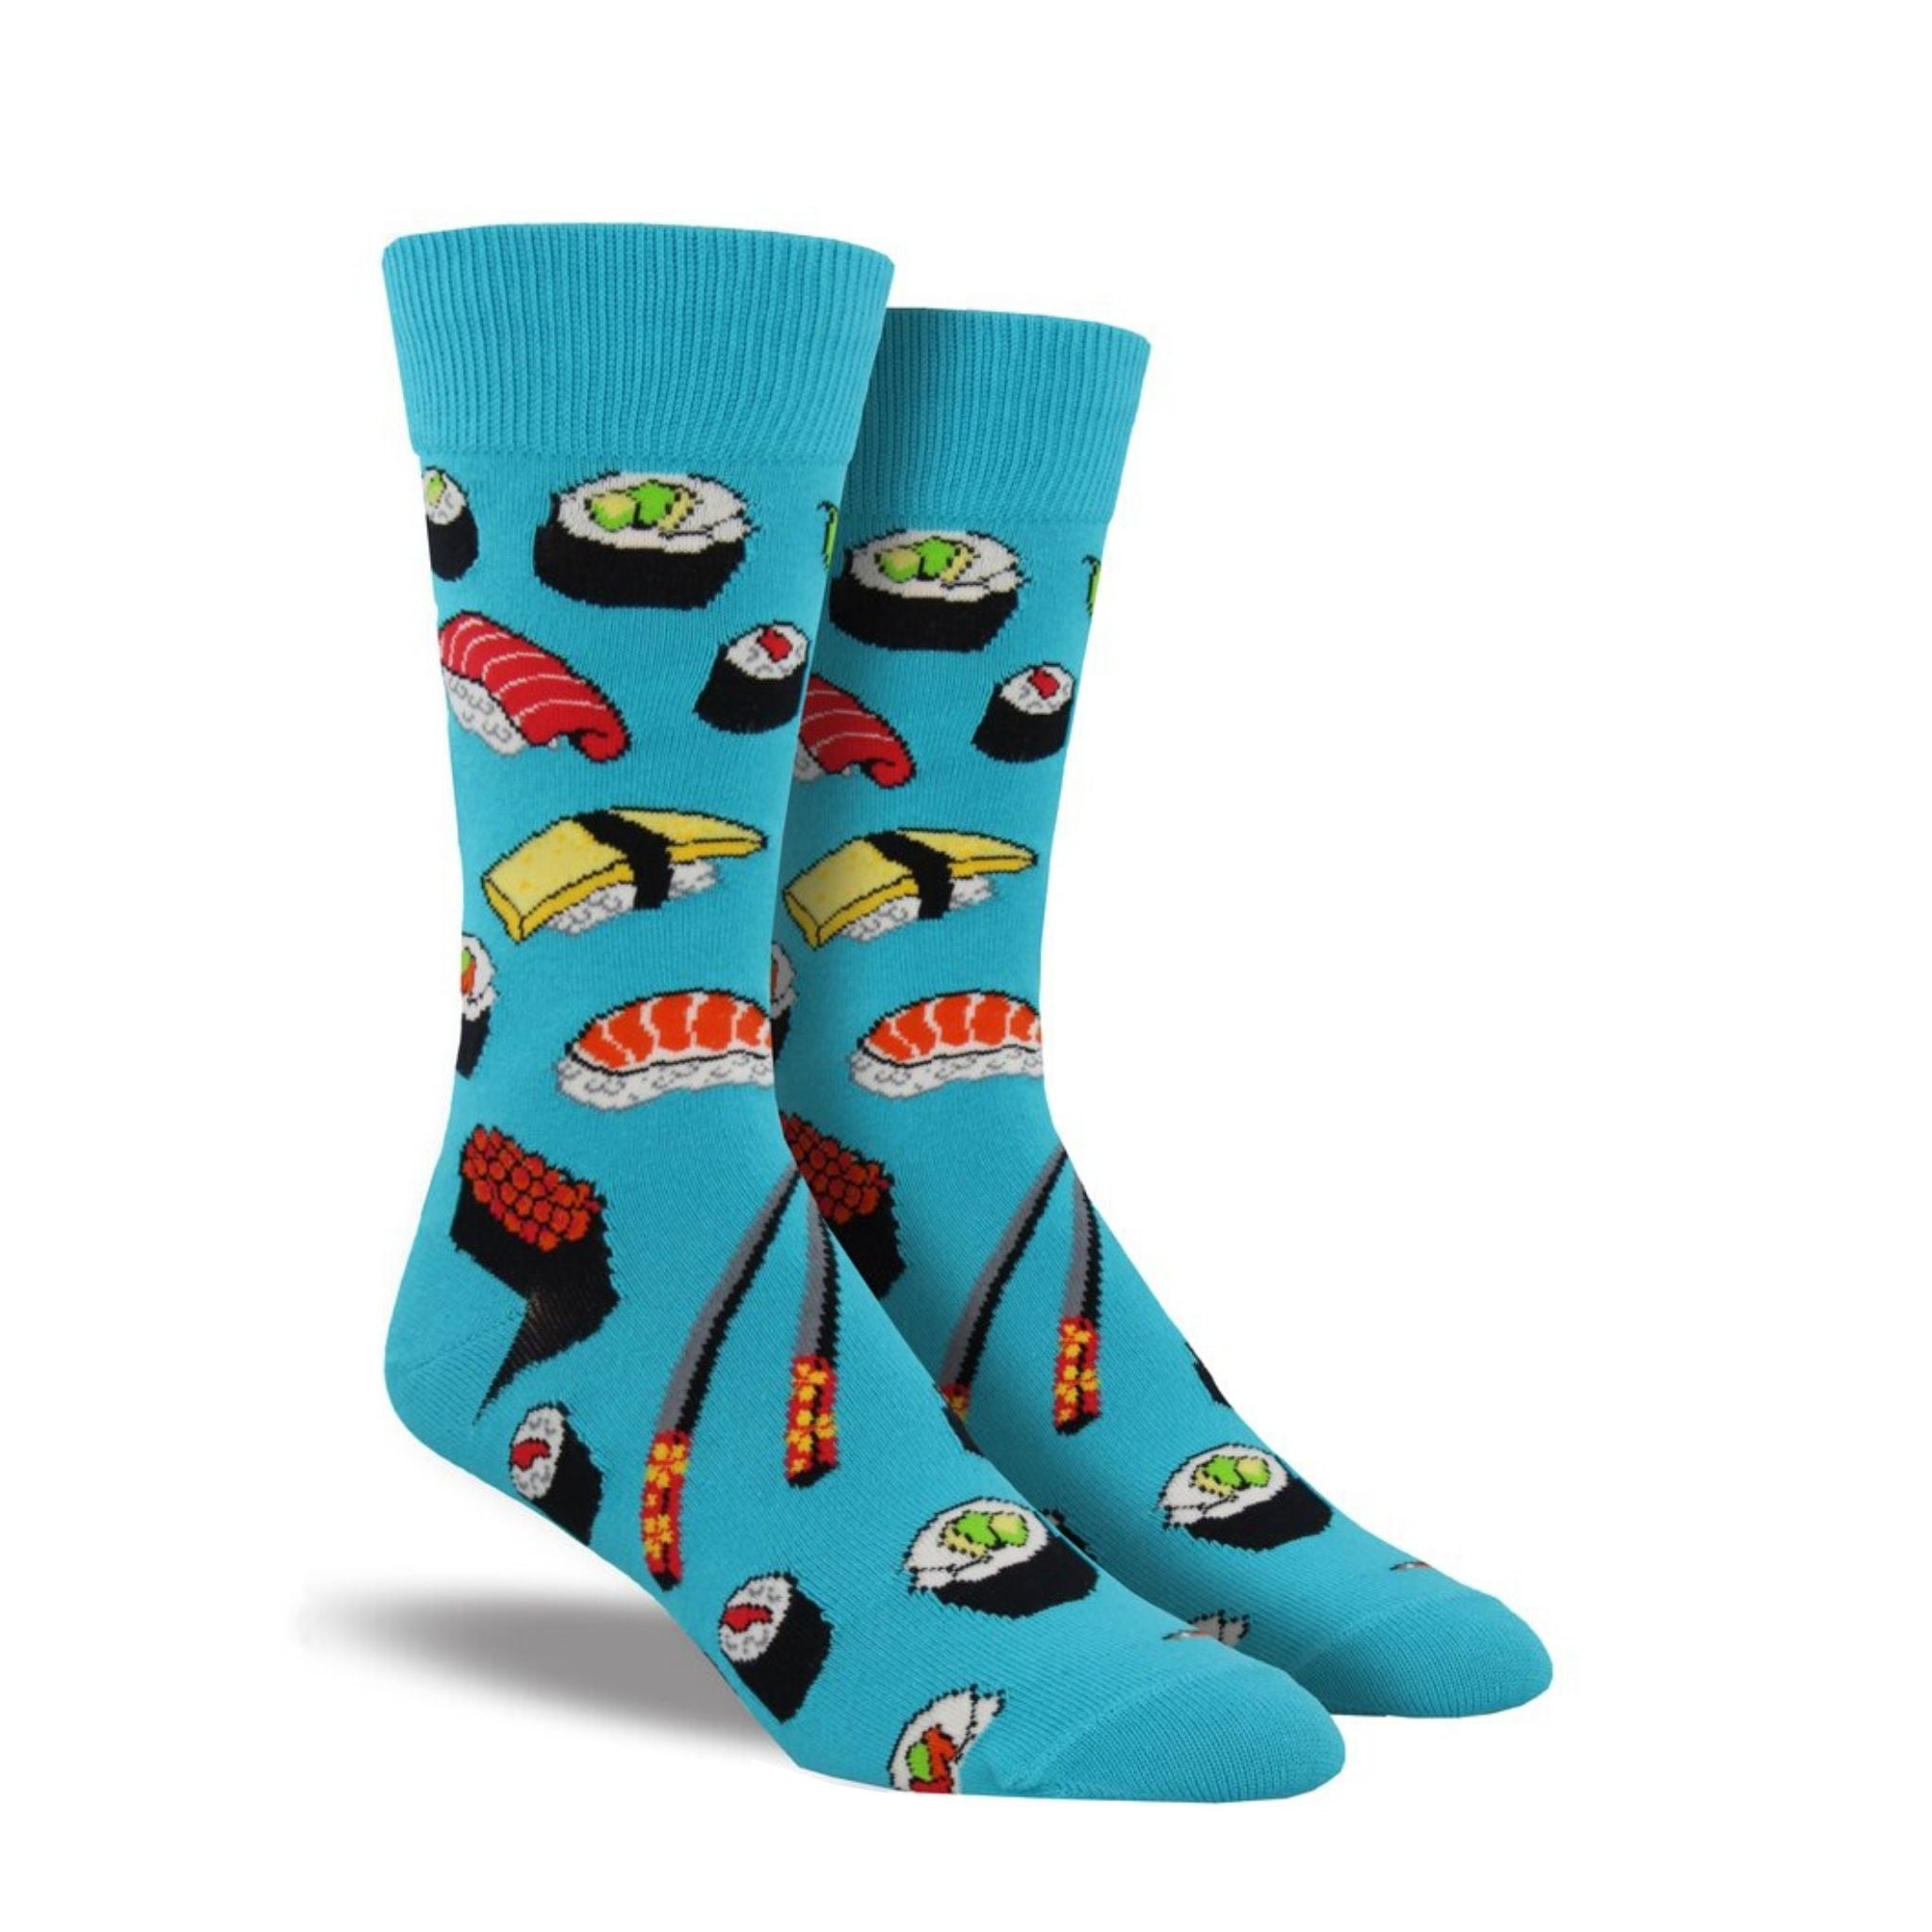 Blue socks with sushi on them